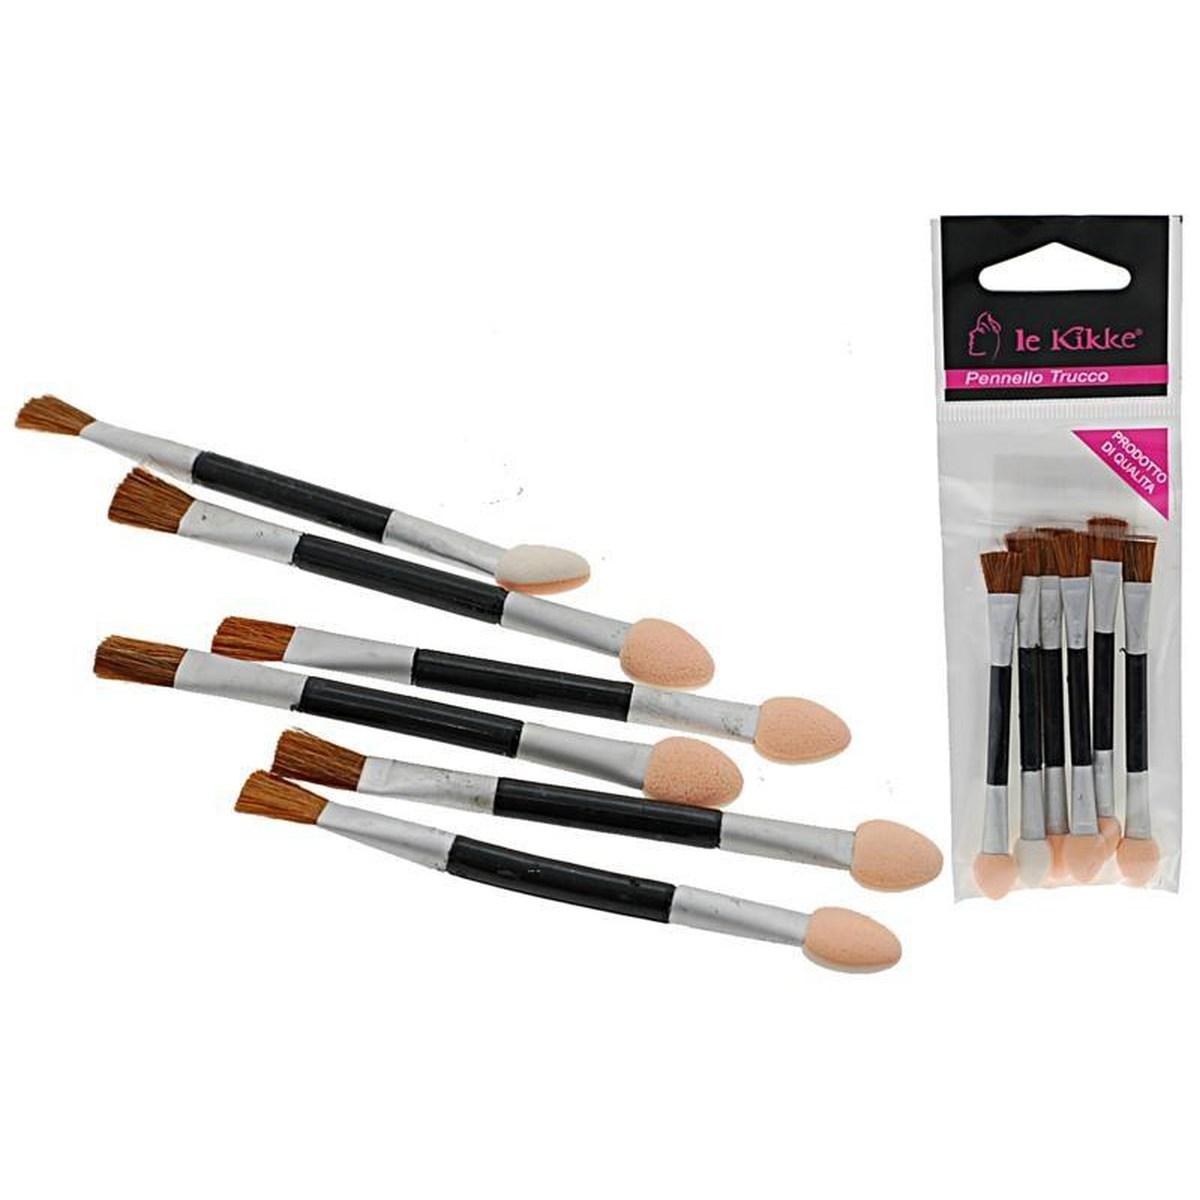 Tools For Beauty Set Of 6 Make-Up Brushes - Set pennelli trucco, 6 pz